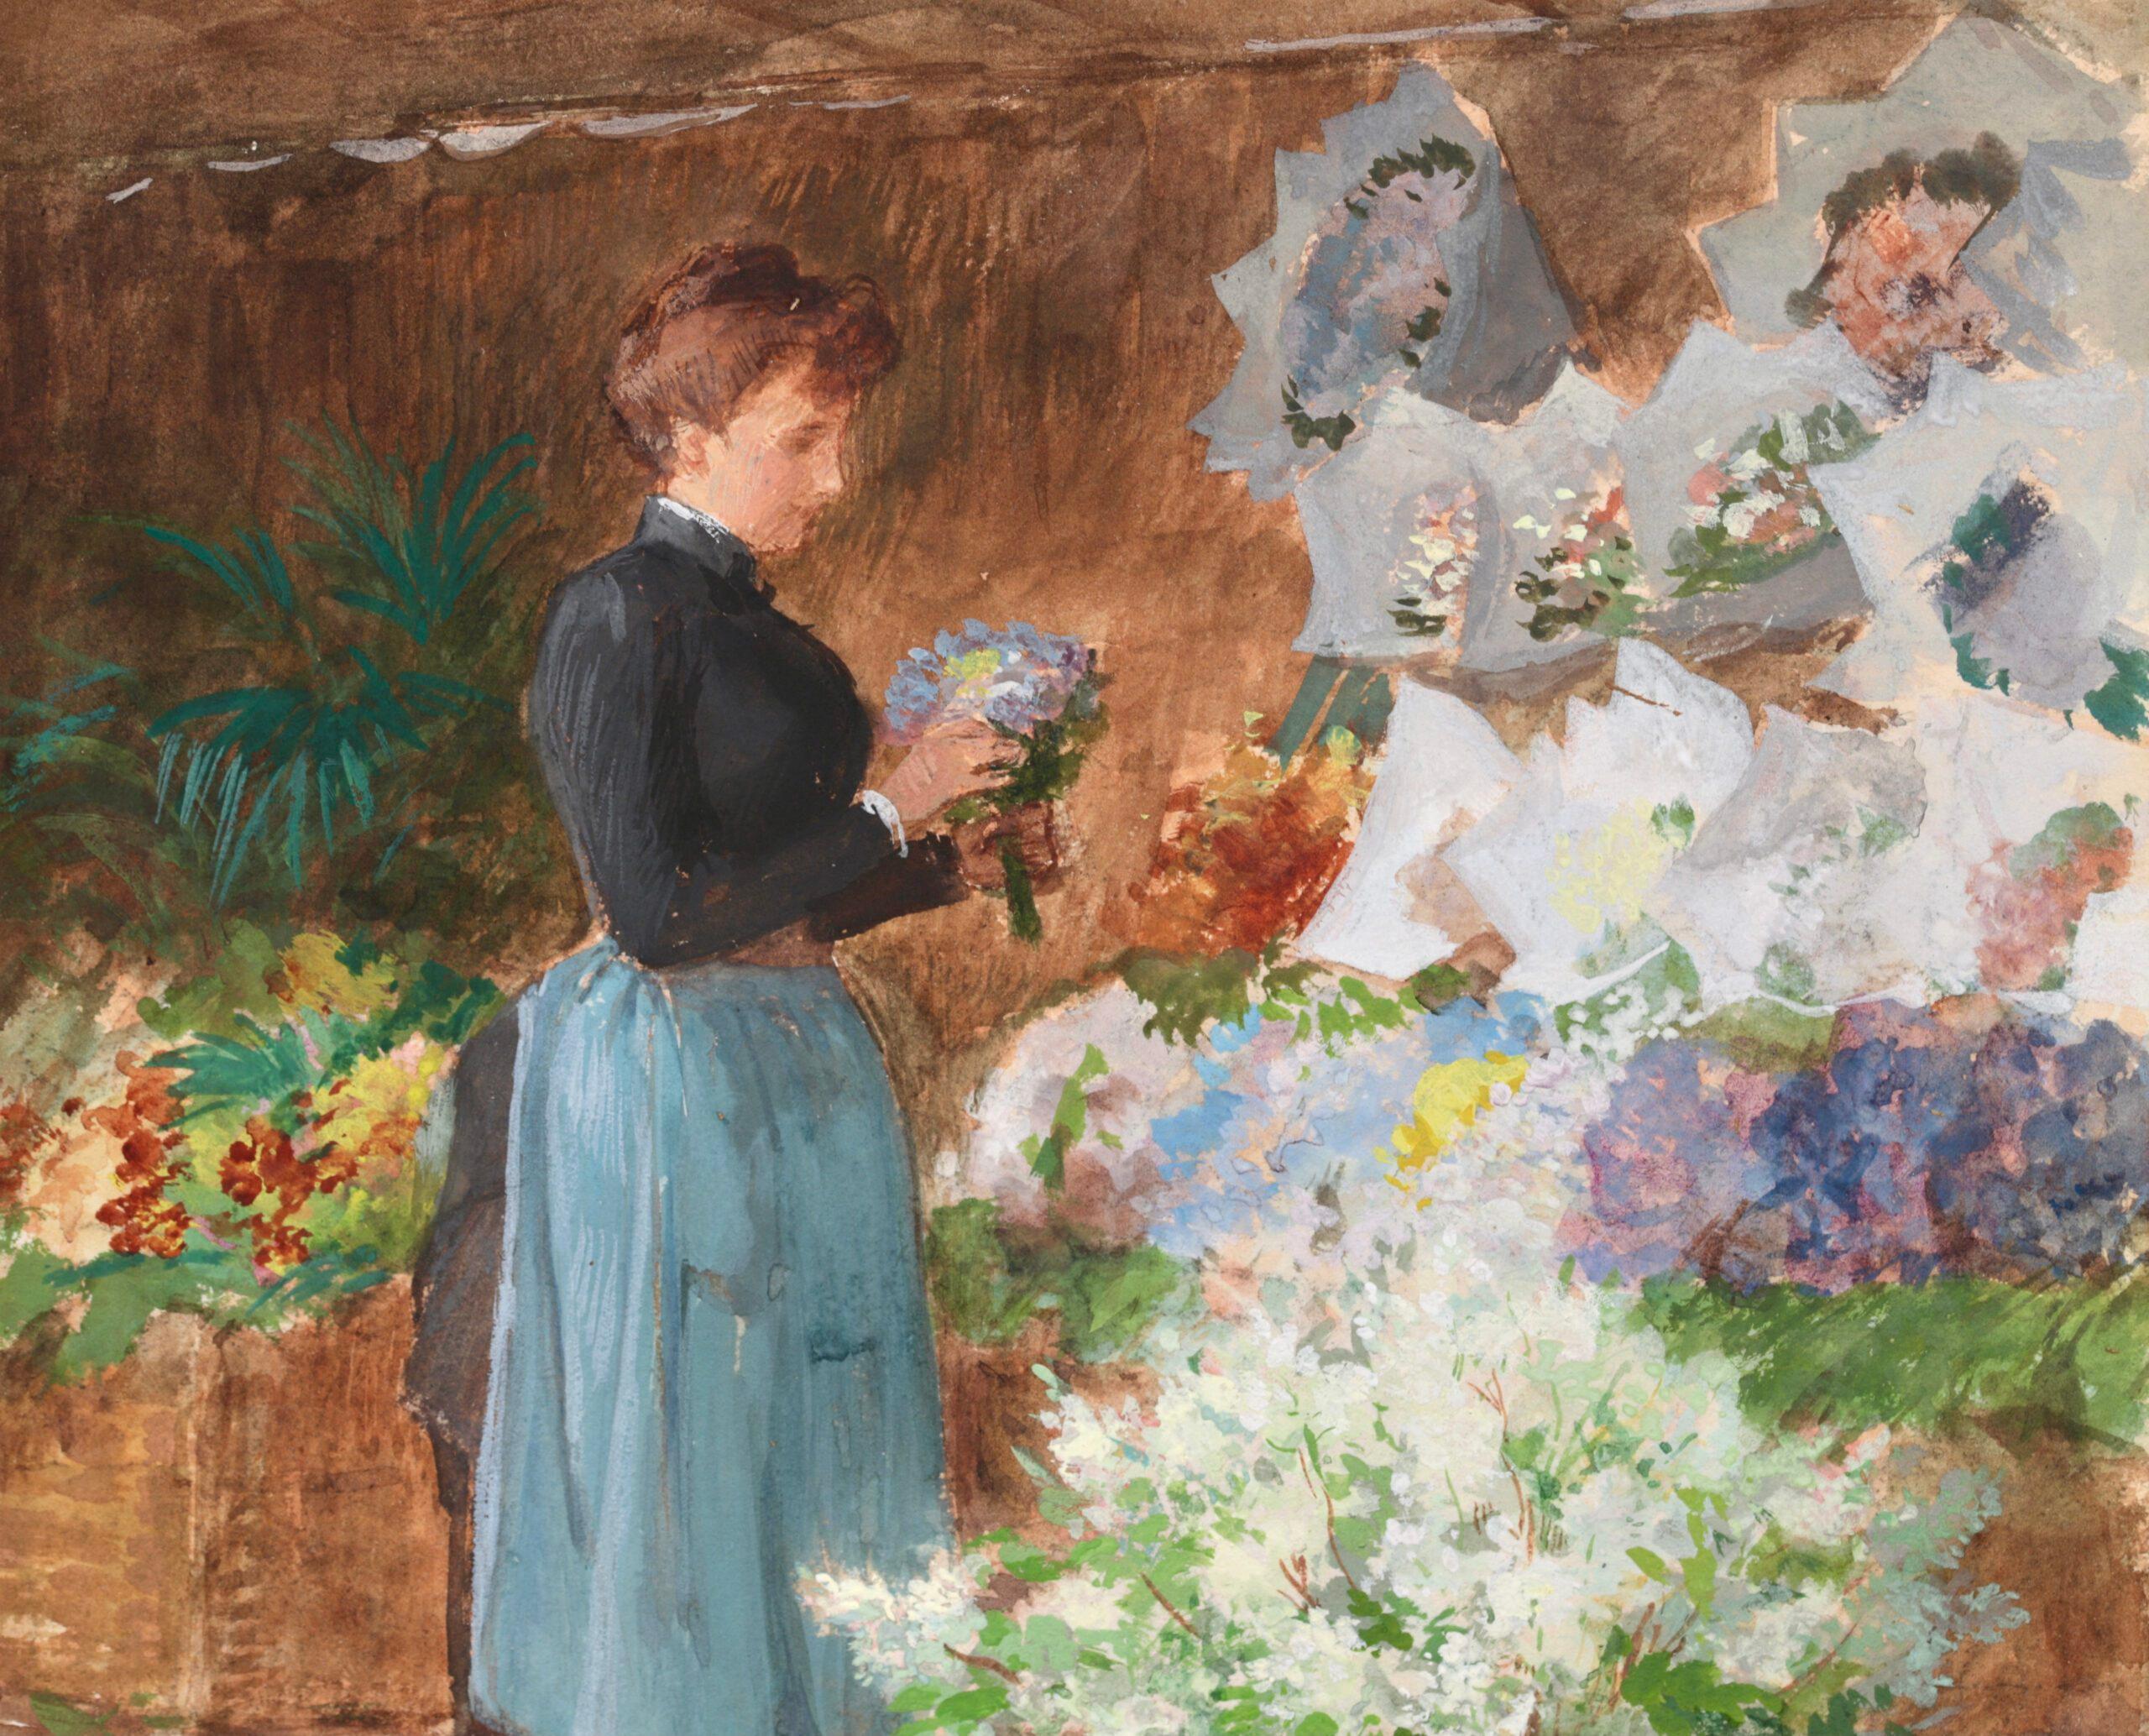 Signed figurative watercolour on board by French realist painter Victor Gabriel Gilbert. The work depicts a flower seller at her market stall selling beautifully coloured bouquets of flowers. 

Signature:
Signed lower left

Dimensions:
Framed: